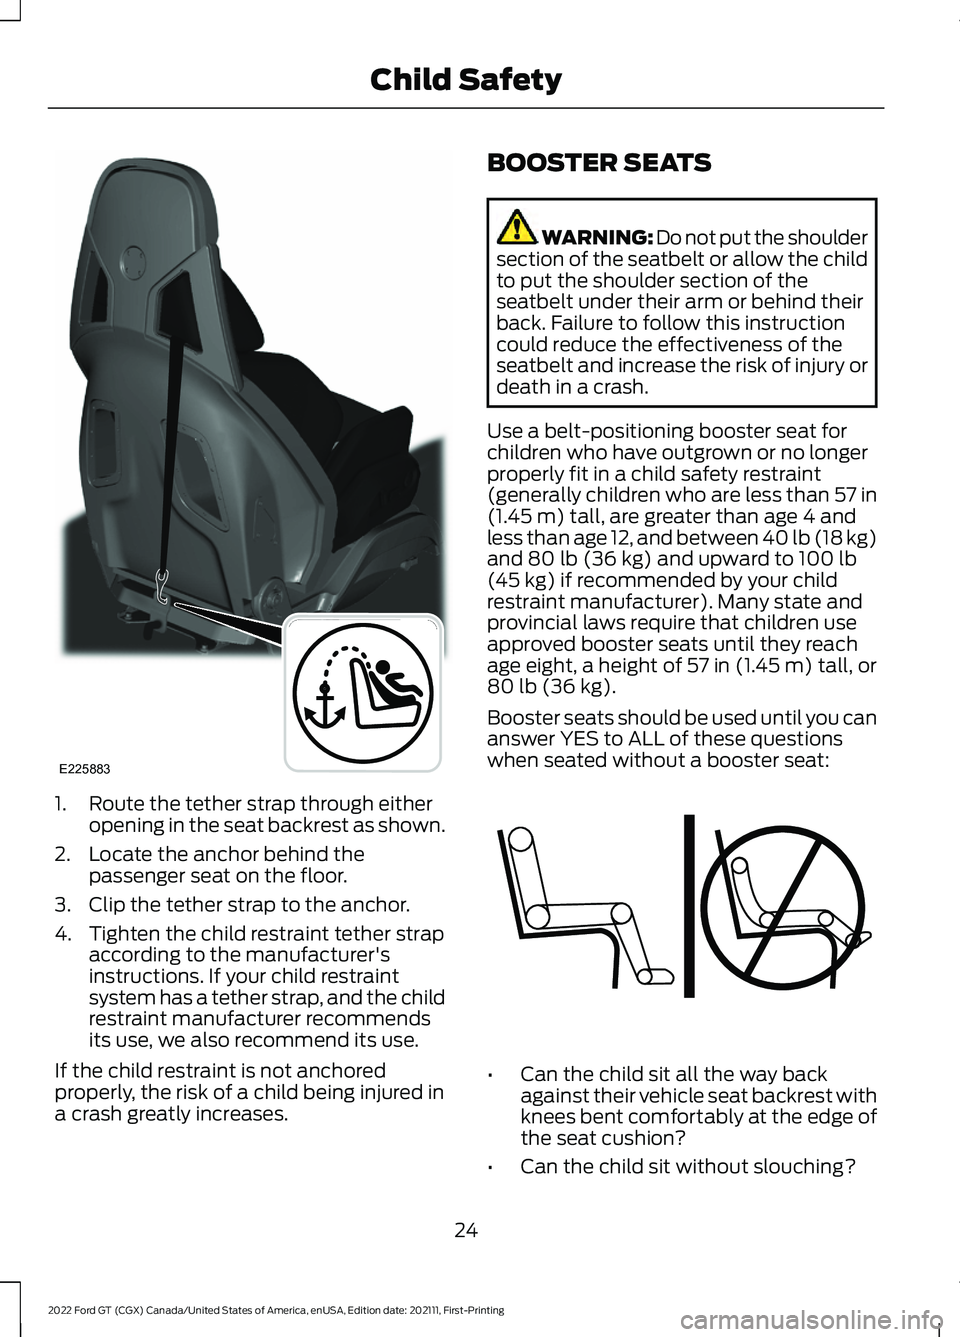 FORD GT 2022  Owners Manual 1. Route the tether strap through either
opening in the seat backrest as shown.
2. Locate the anchor behind the passenger seat on the floor.
3. Clip the tether strap to the anchor.
4. Tighten the chil